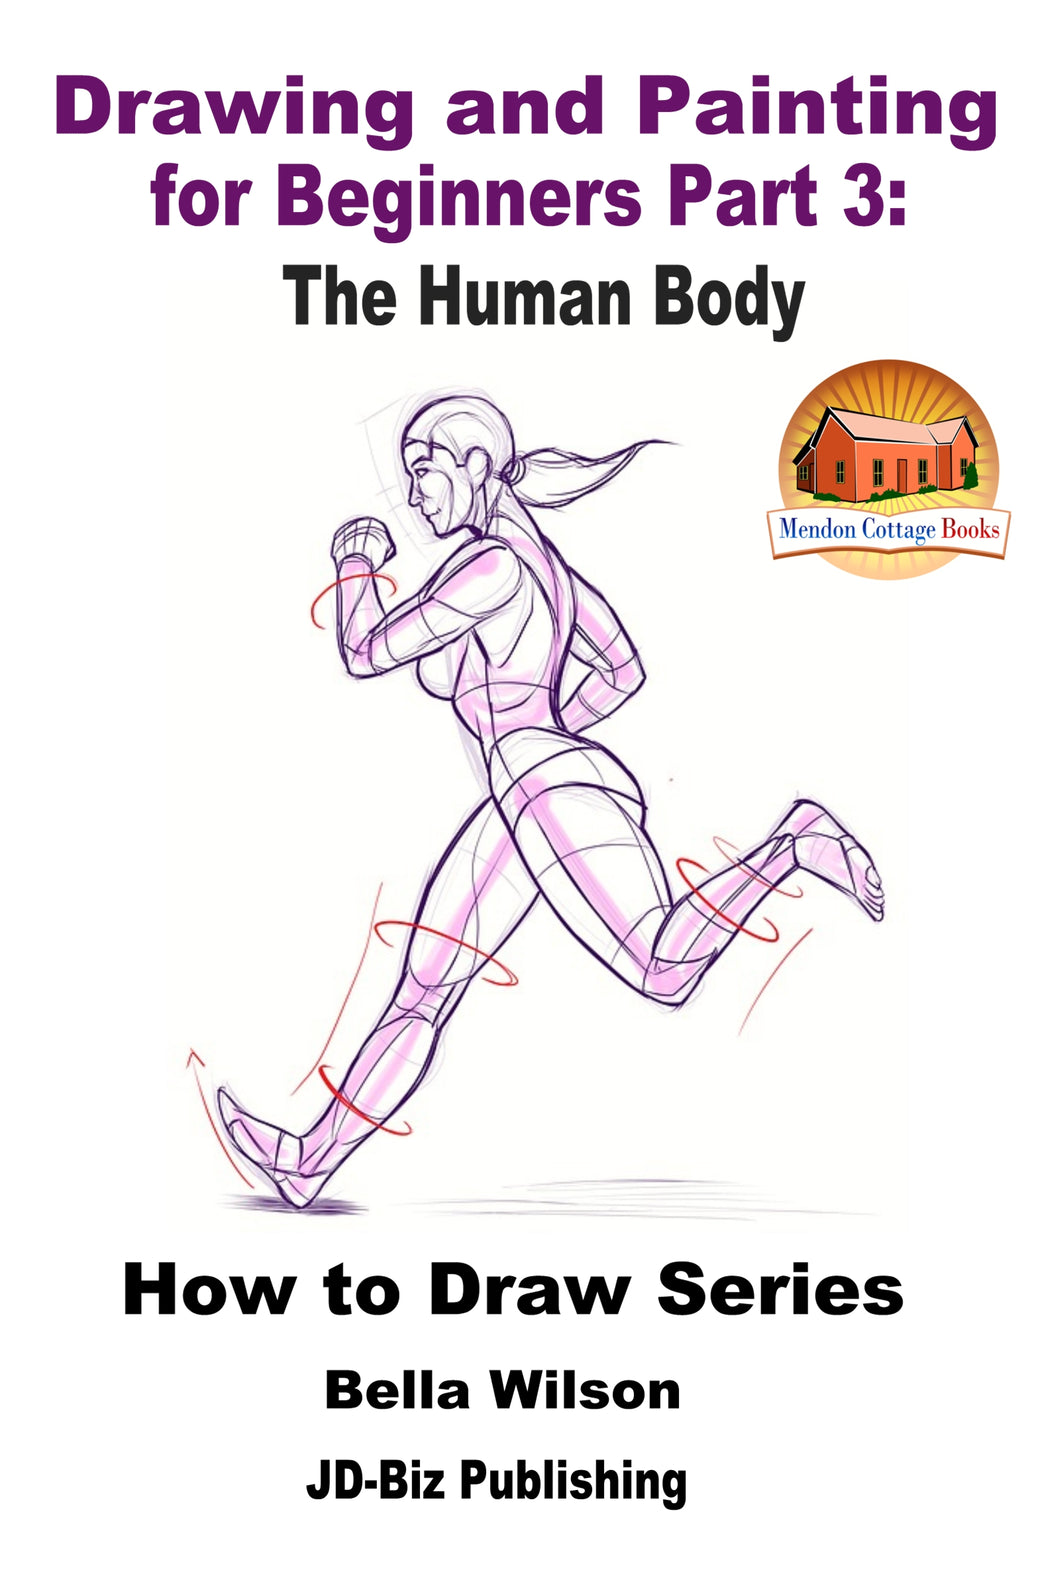 Drawing and Painting for Beginners Part 3: The Human Body